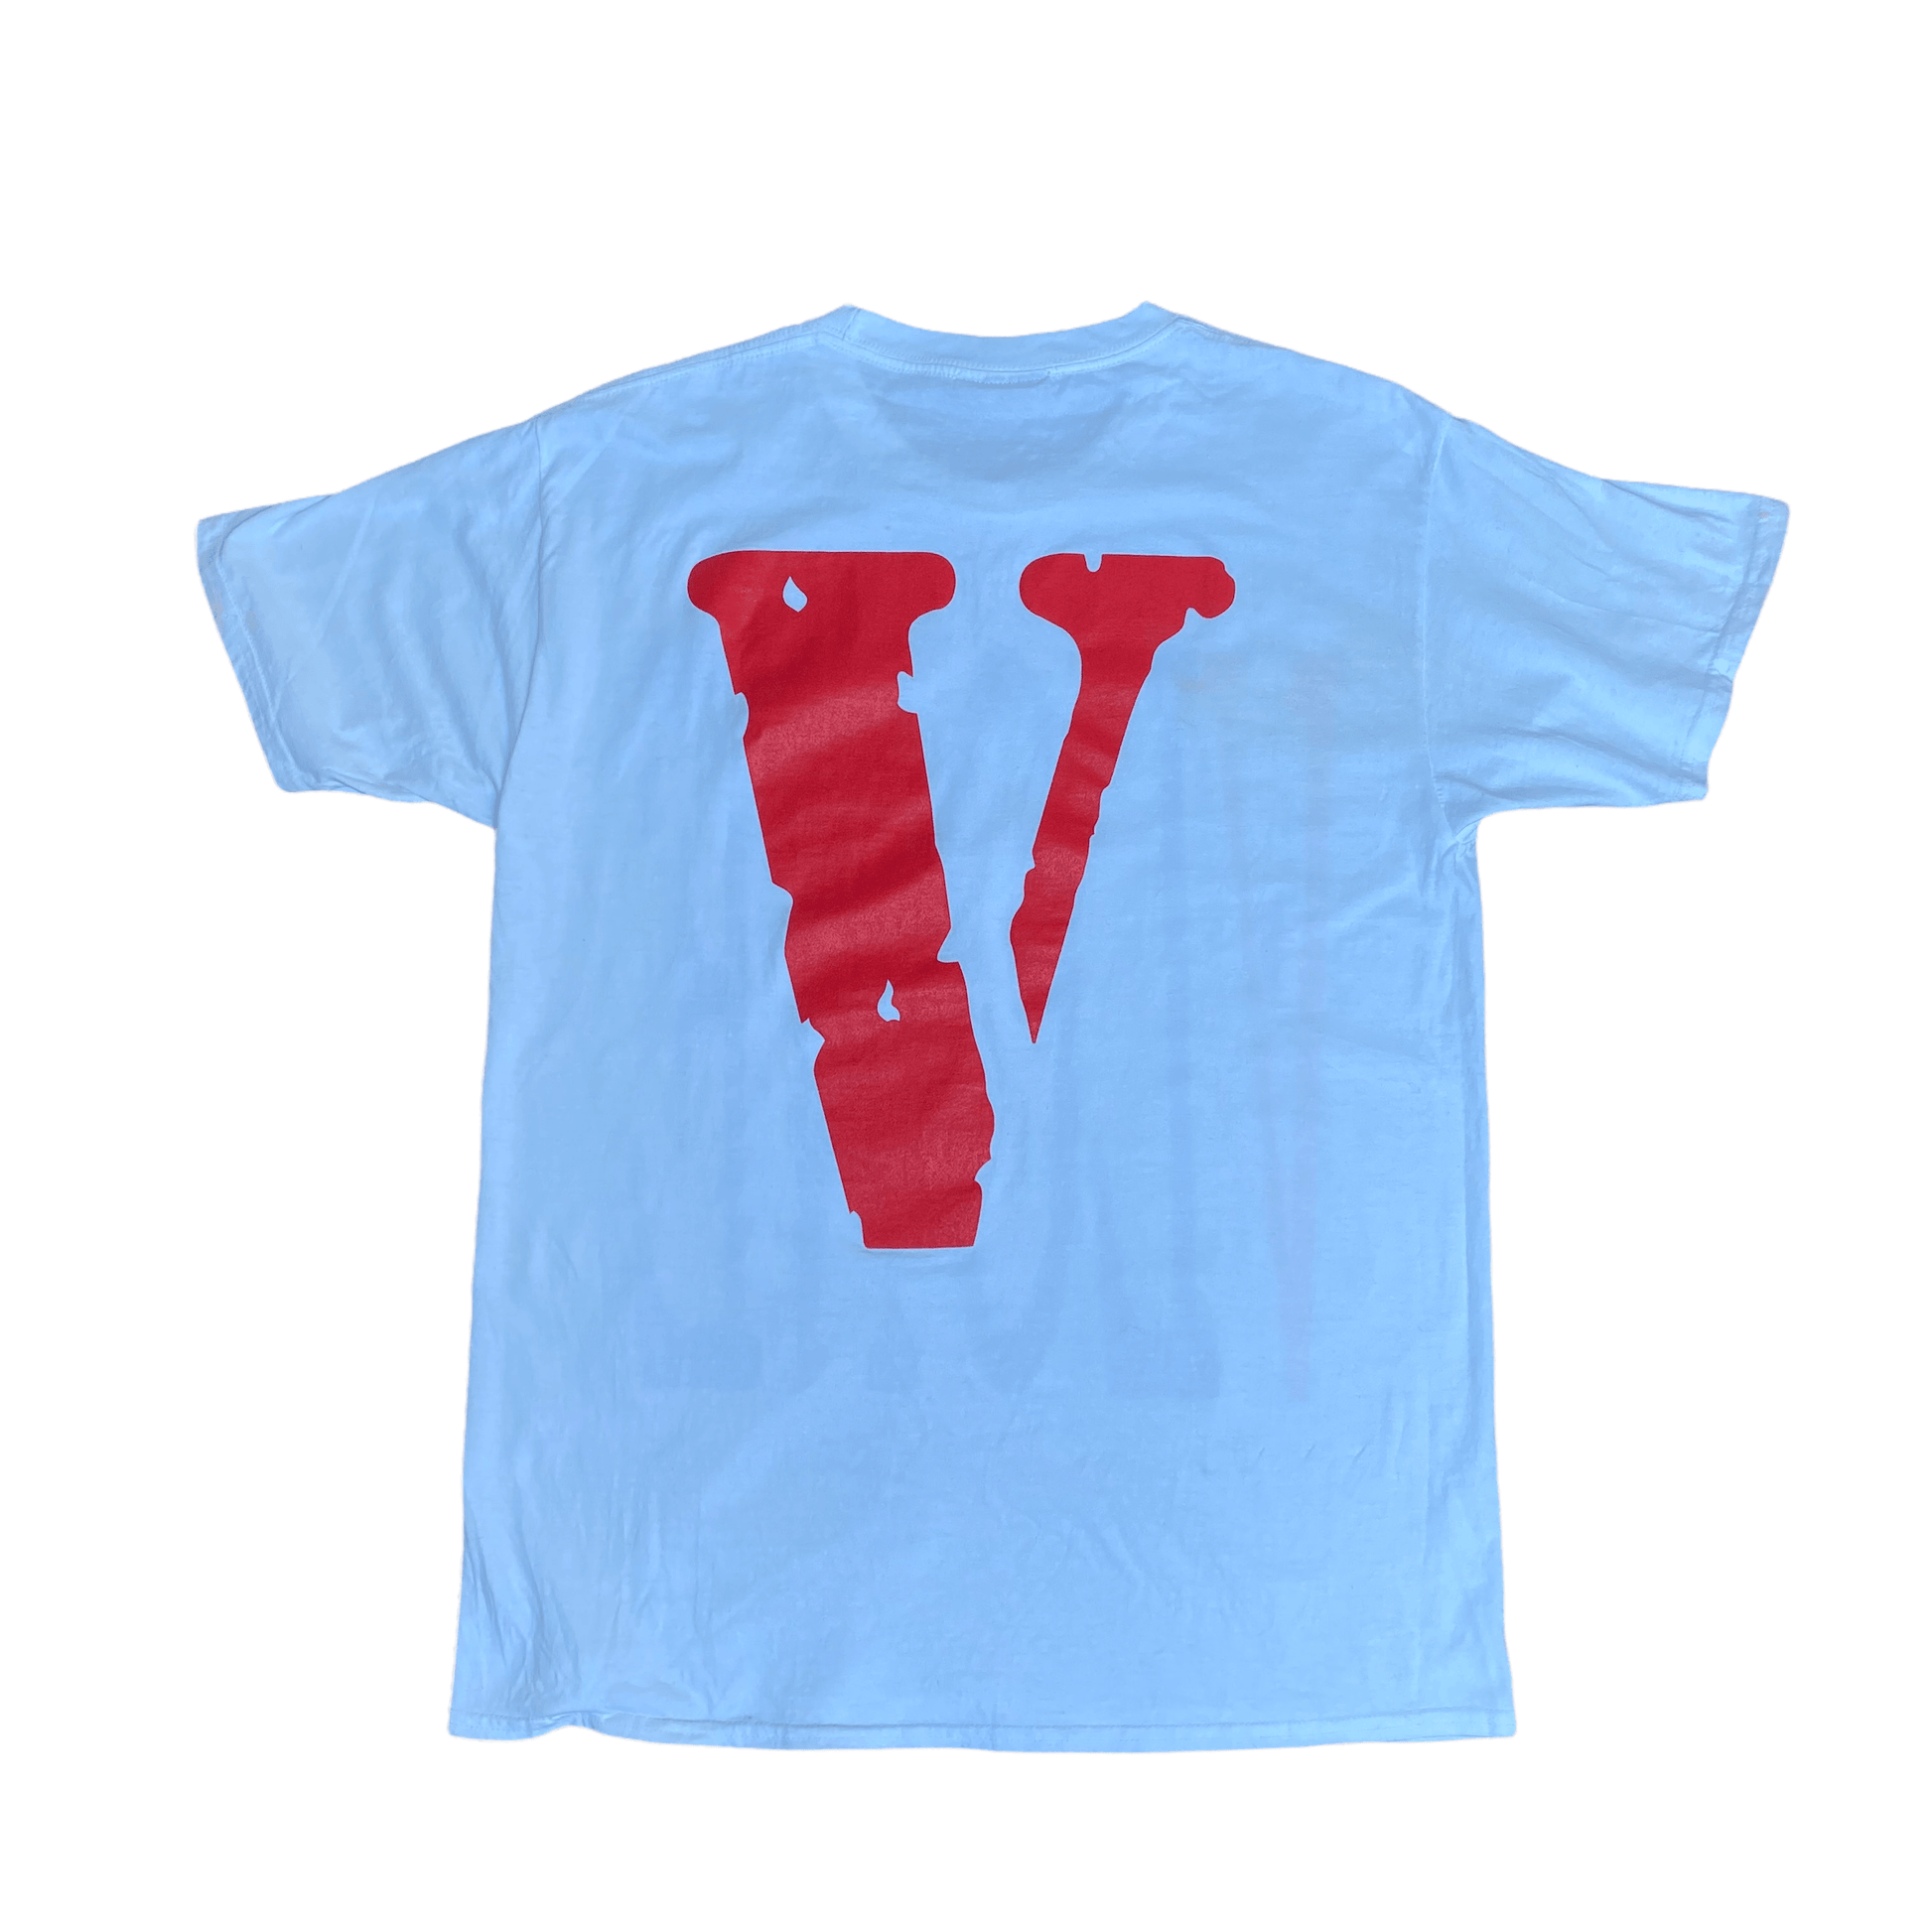 Vlone Front and back Logo Tee White Red Blue (M) - Known Source